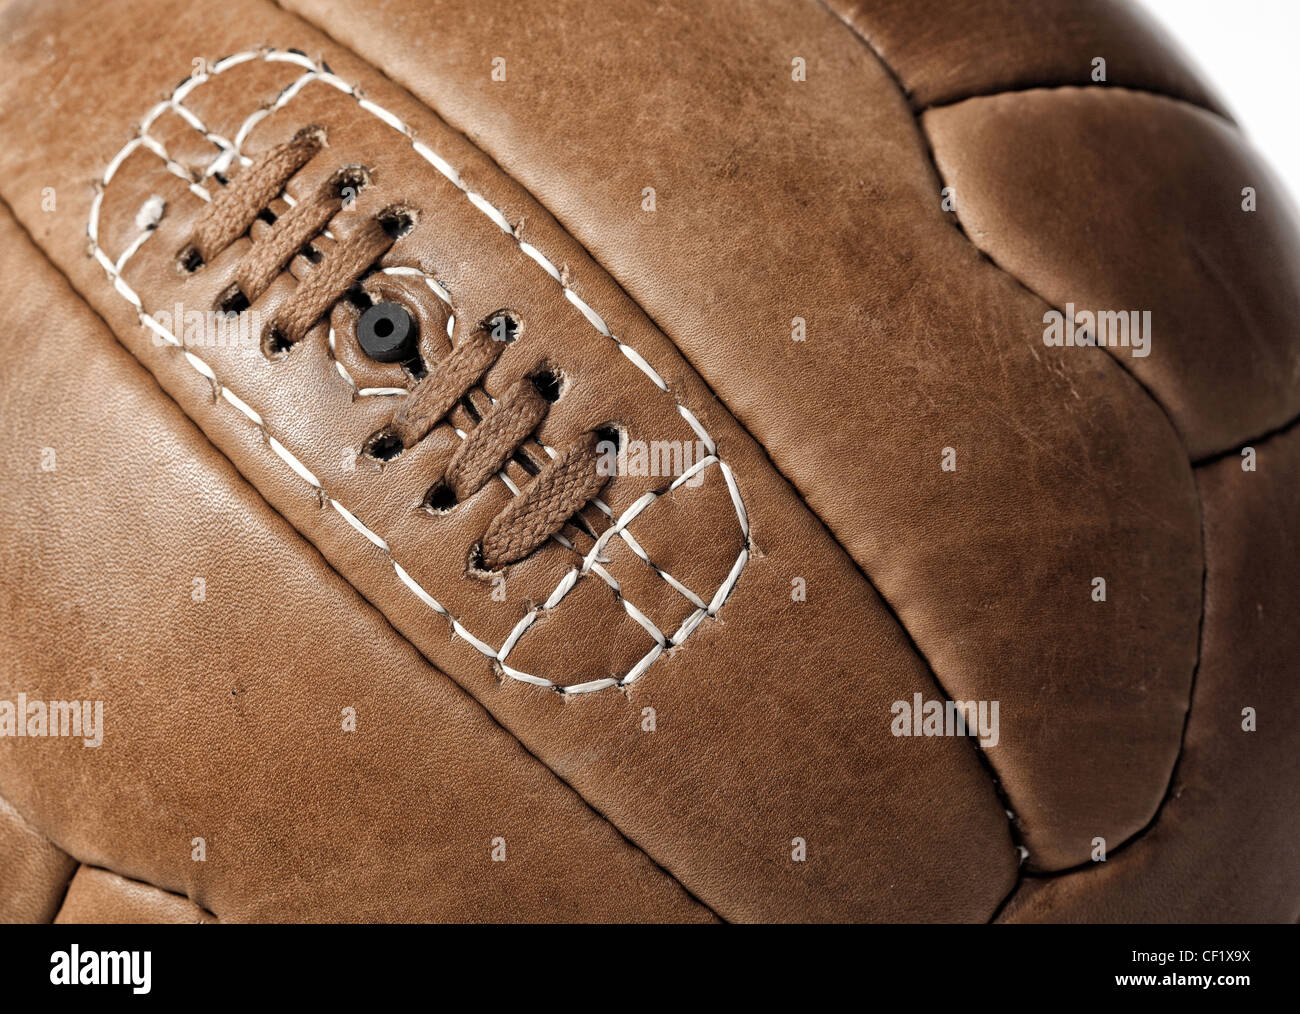 detail of leather soccer ball Stock Photo